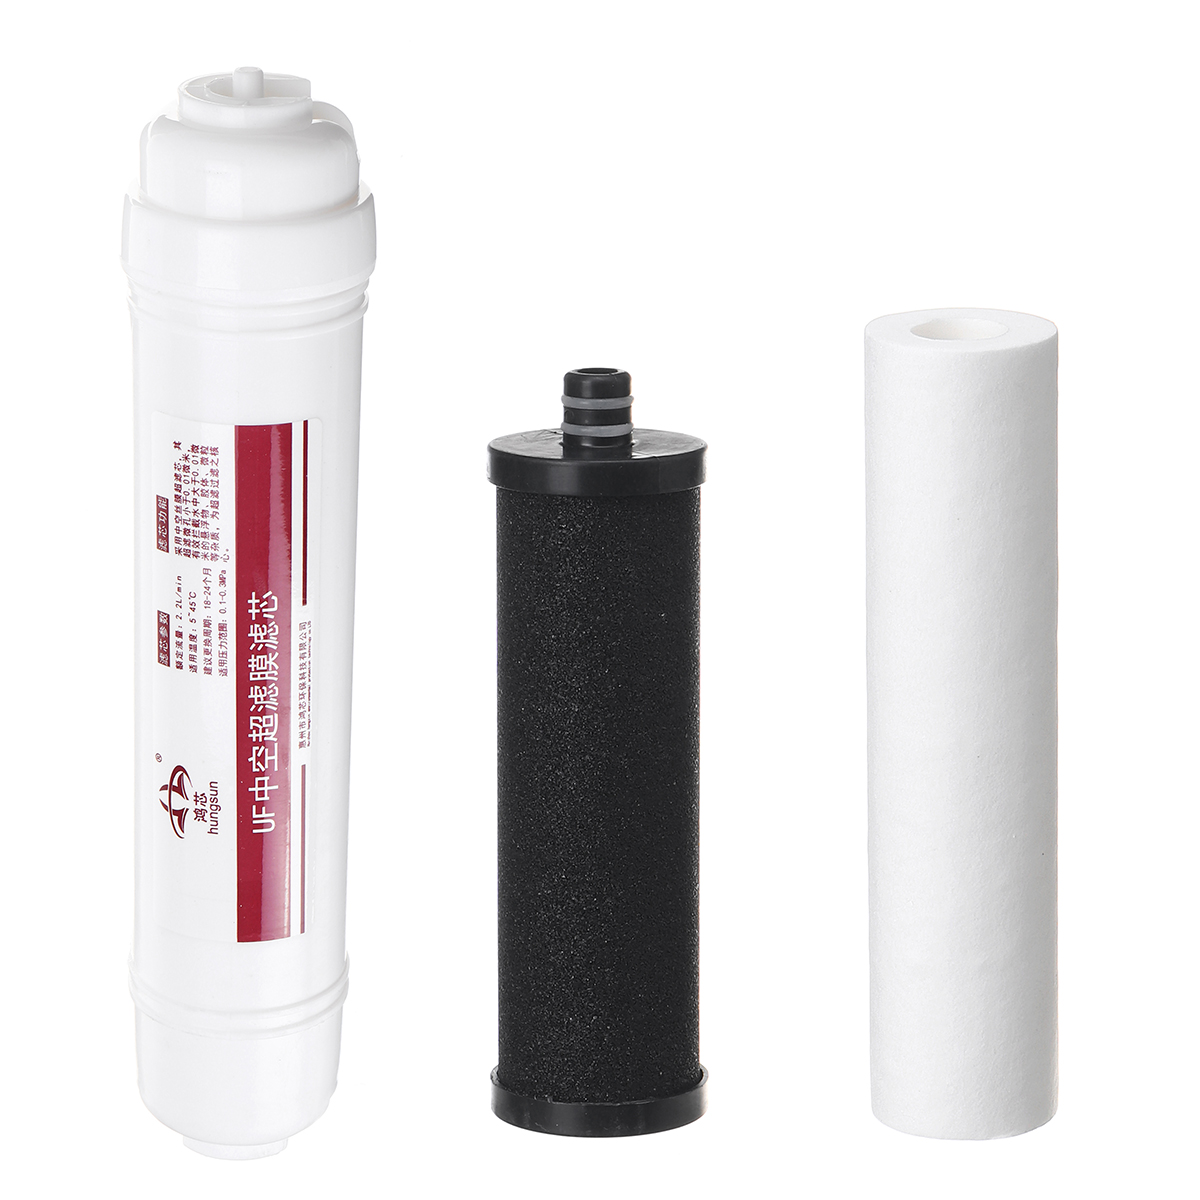 Replacement-Filter-for-6-Stages-Water-Filter-System-Home-Kitchen-Purifier-1653700-1